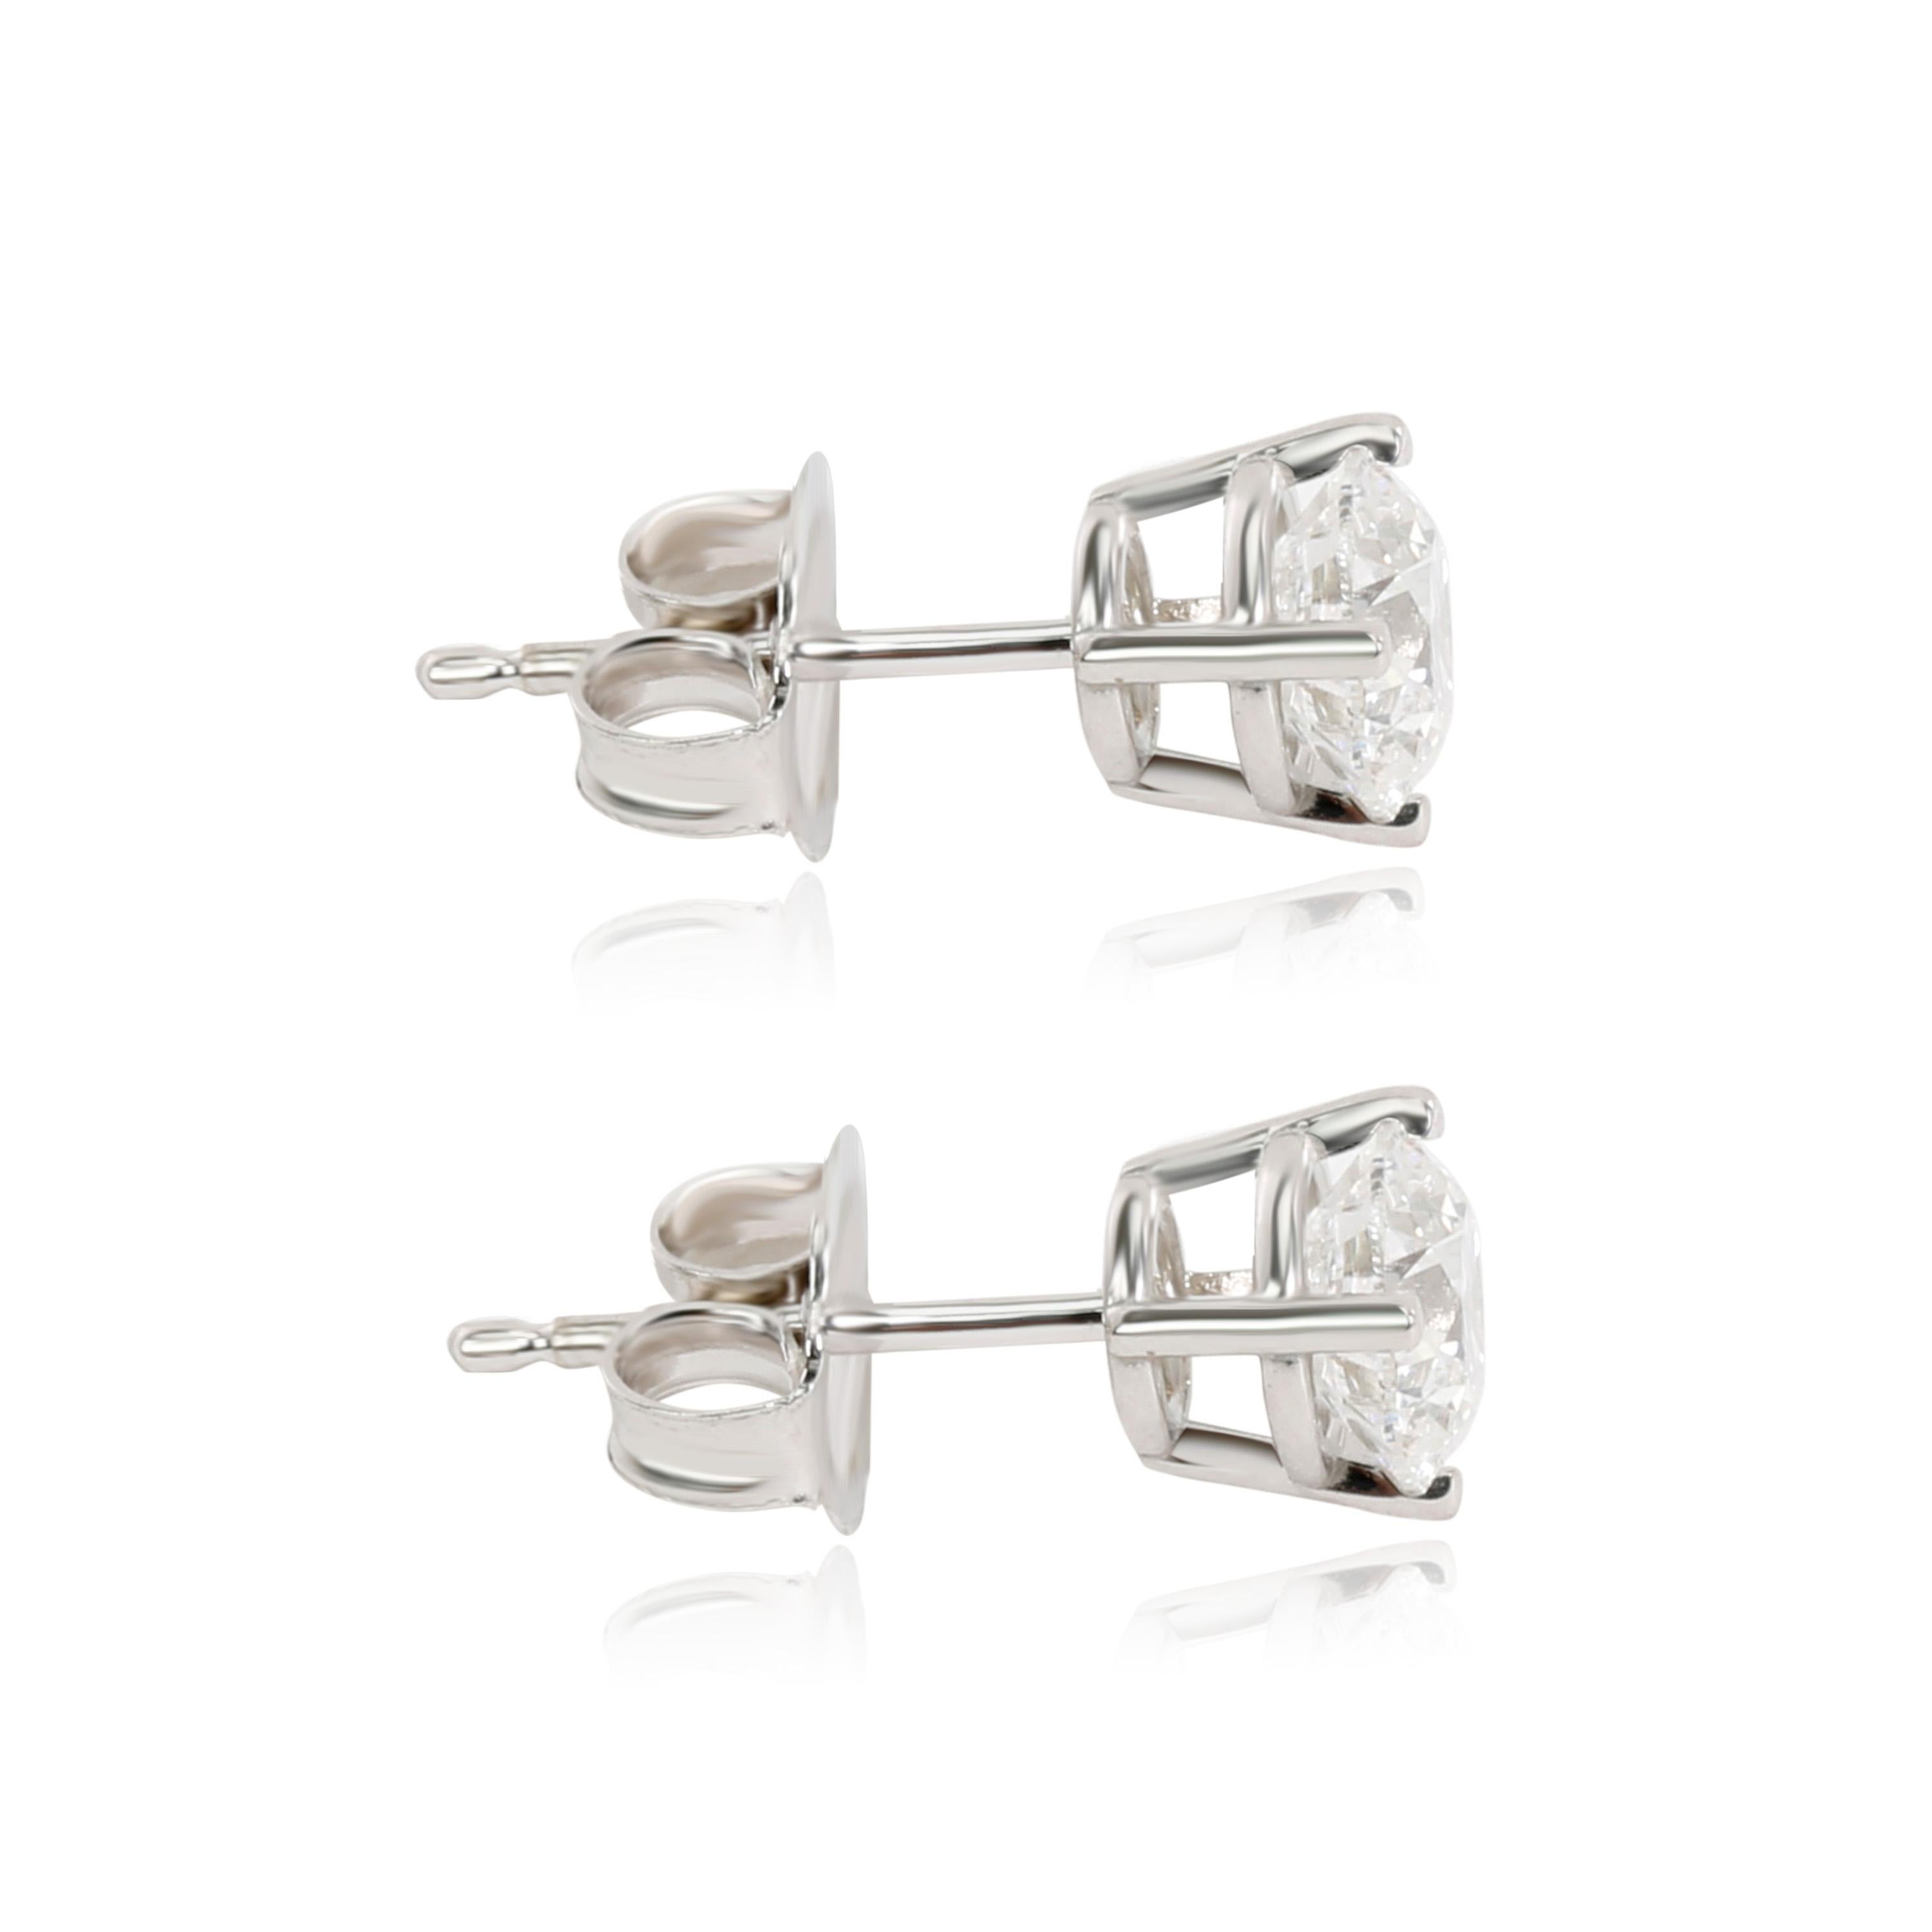 GIA Certified Diamond Stud Earring in 14K White Gold H-I SI1 1 CTW

PRIMARY DETAILS
SKU: 094709
Listing Title: GIA Certified Diamond Stud Earring in 14K White Gold H-I SI1 1 CTW
Condition Description: Retails for 3995 USD. Unworn and in excellent